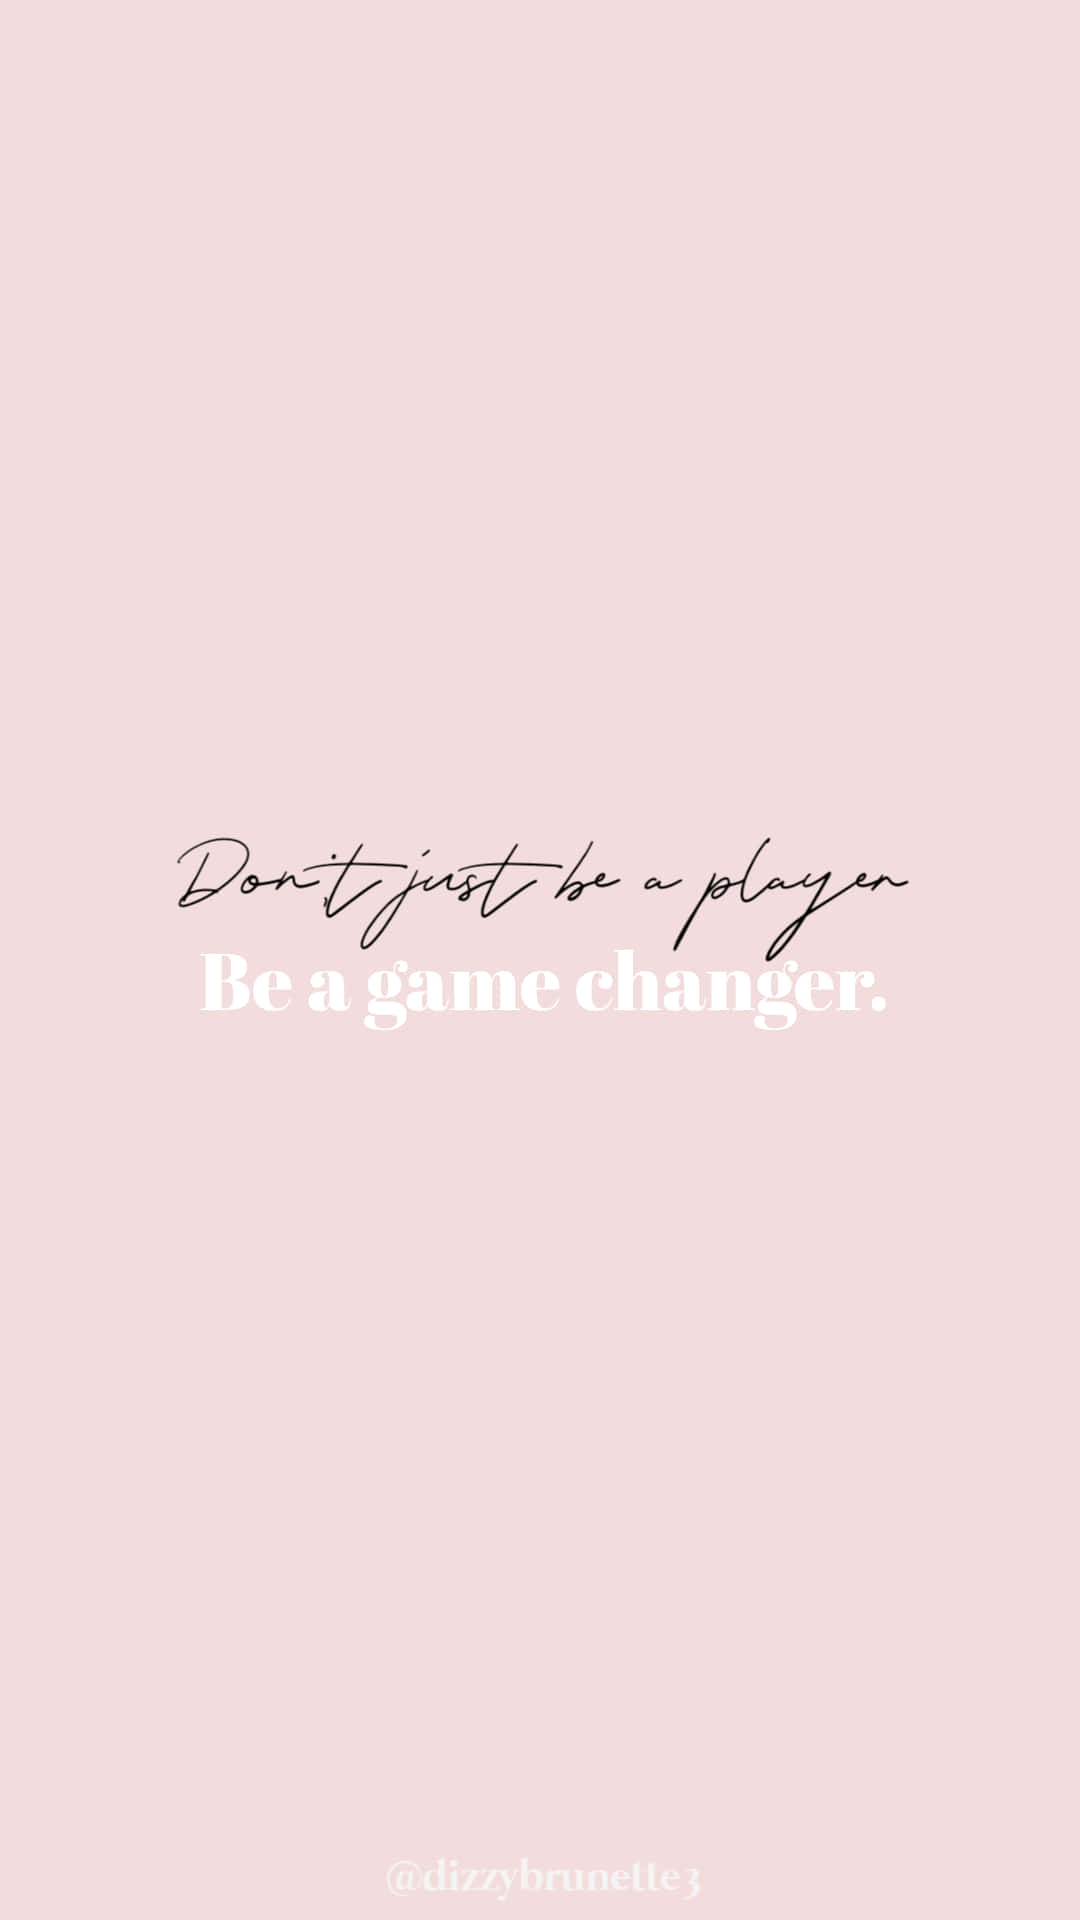 Don't Let The Player Be A Game Changer Wallpaper